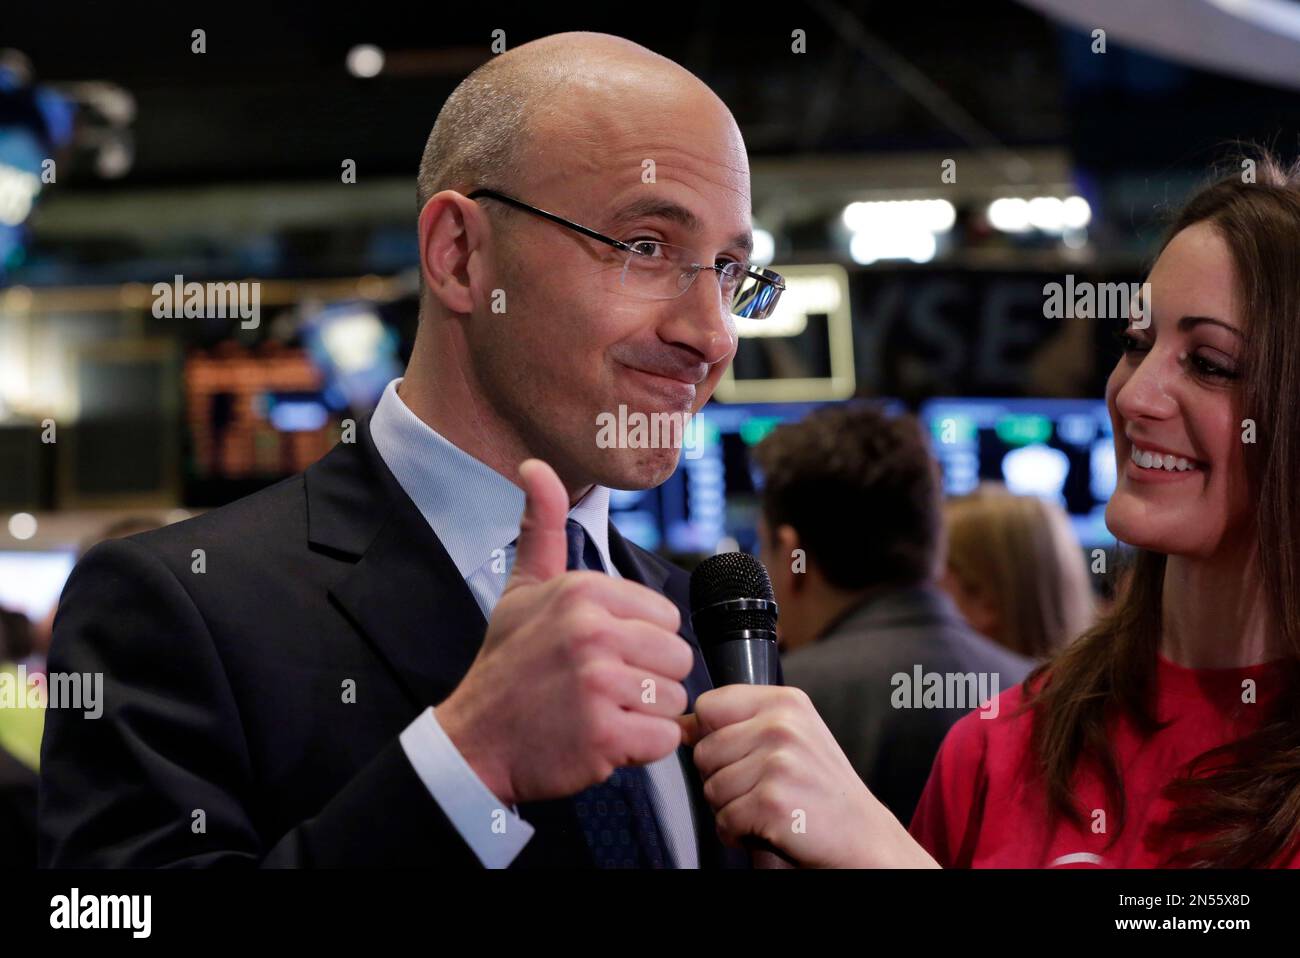 Preview: 'Candy Crush' maker King to go public